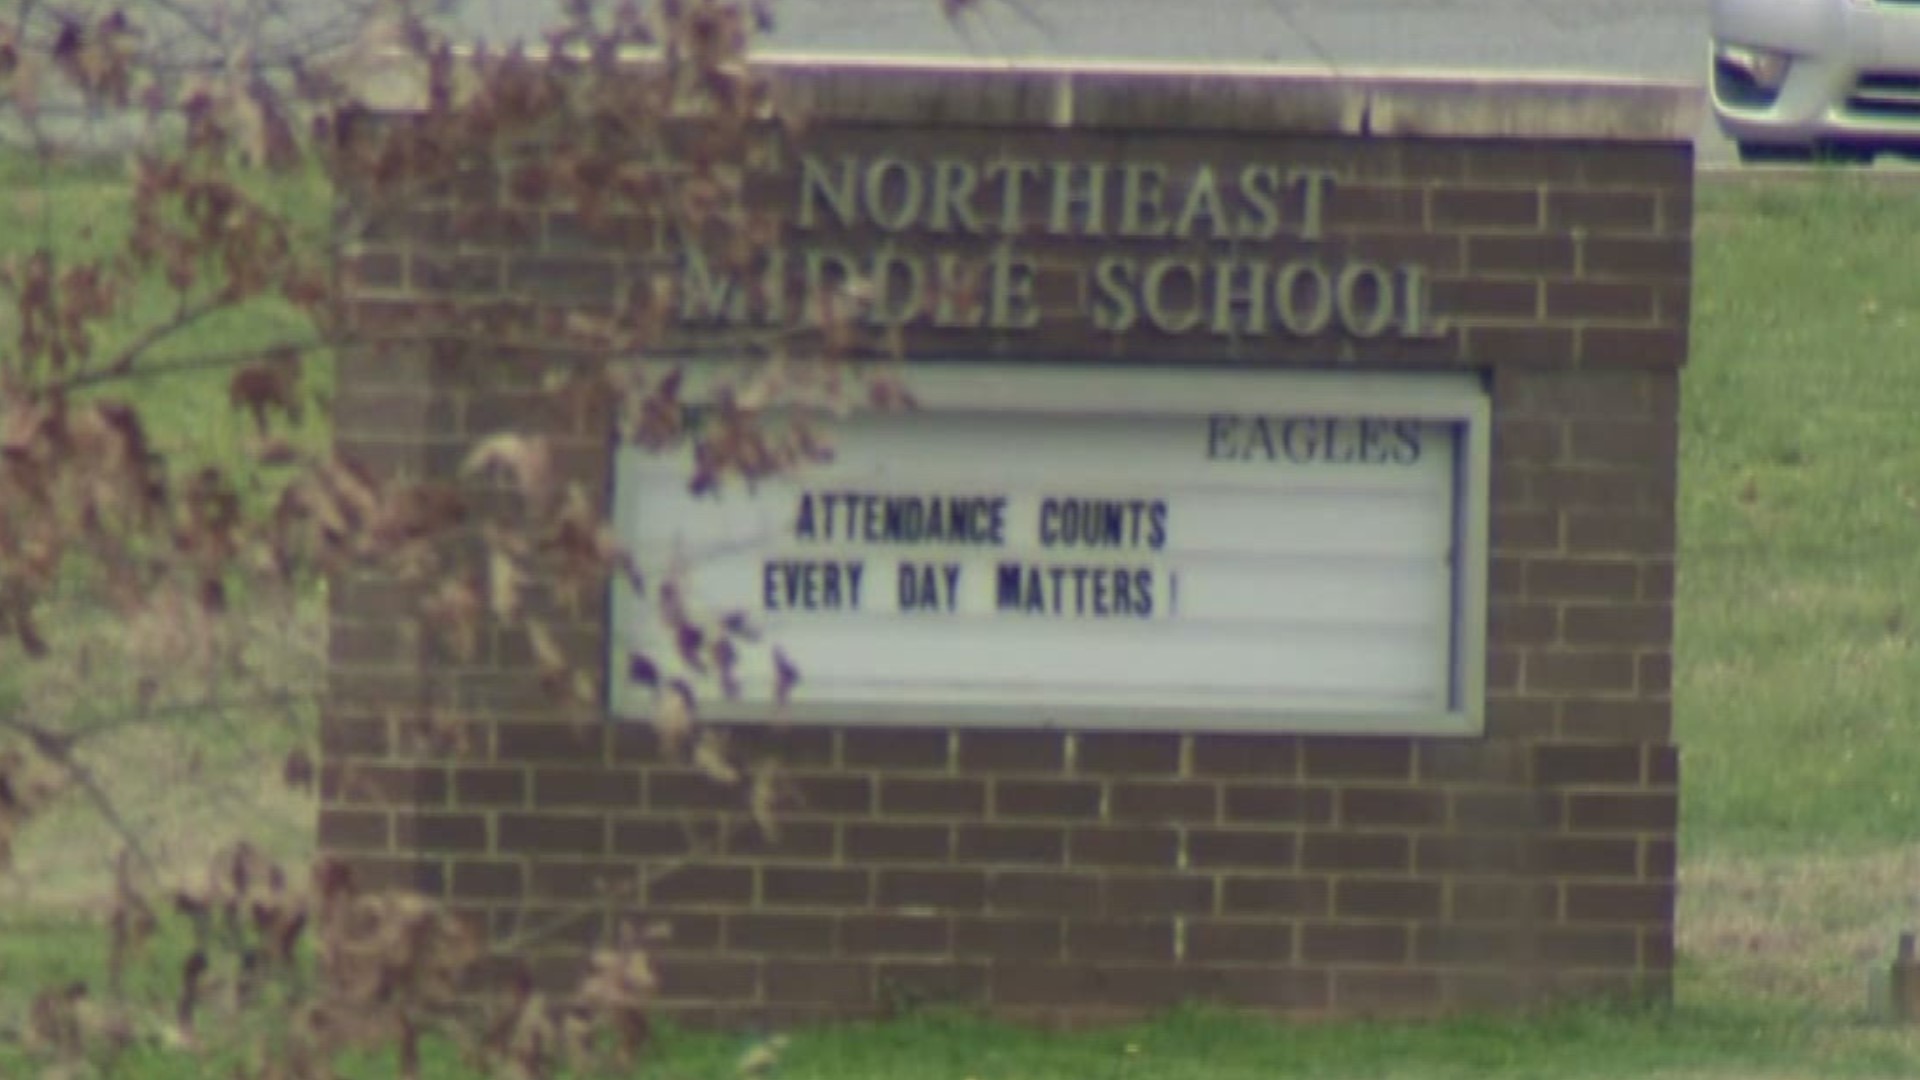 An adult is accused of sending obscene photos to a minor at Northeast Middle School in early January.